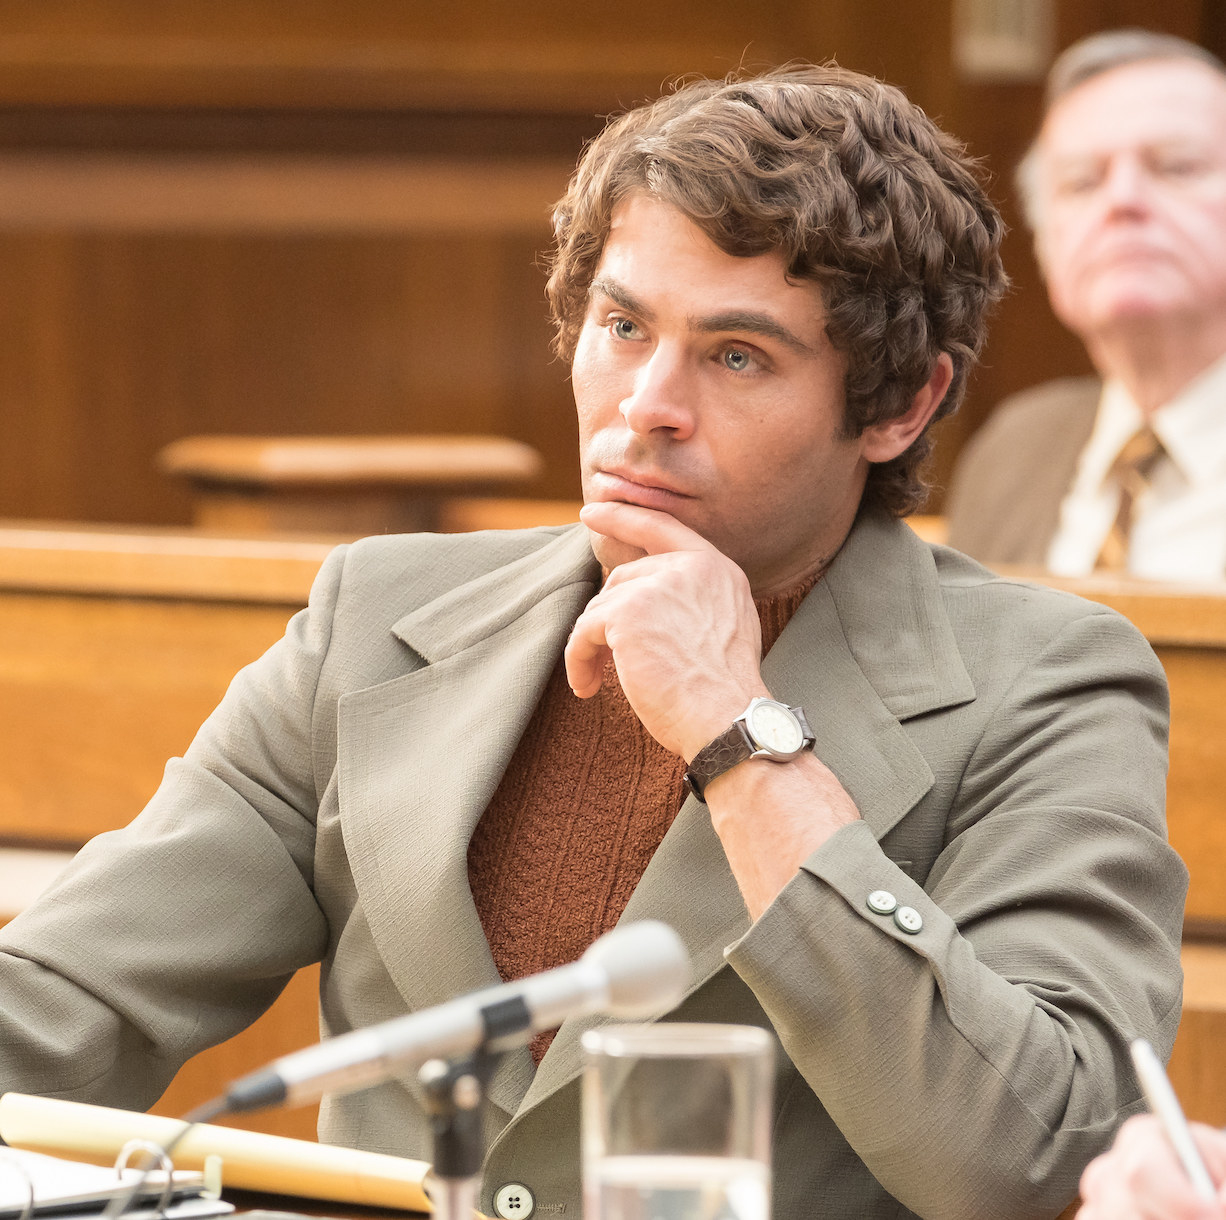 Zac wearing a very similar suit for the trial scene